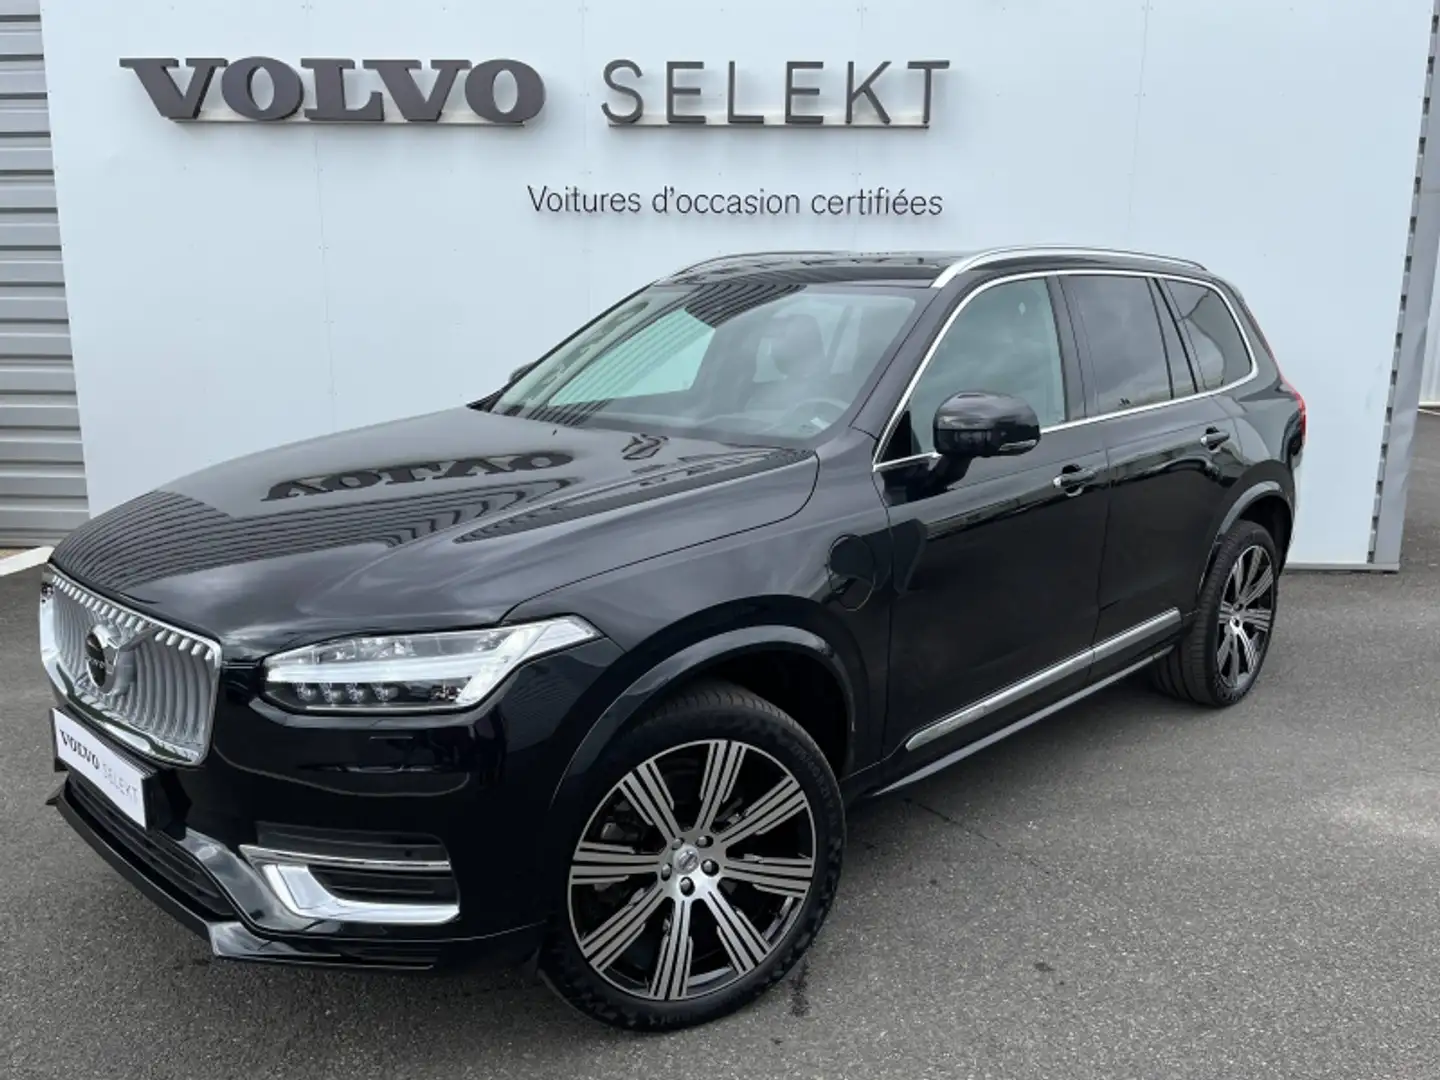 Volvo XC90 T8 AWD 303 + 87ch Inscription Luxe Geartronic - 1